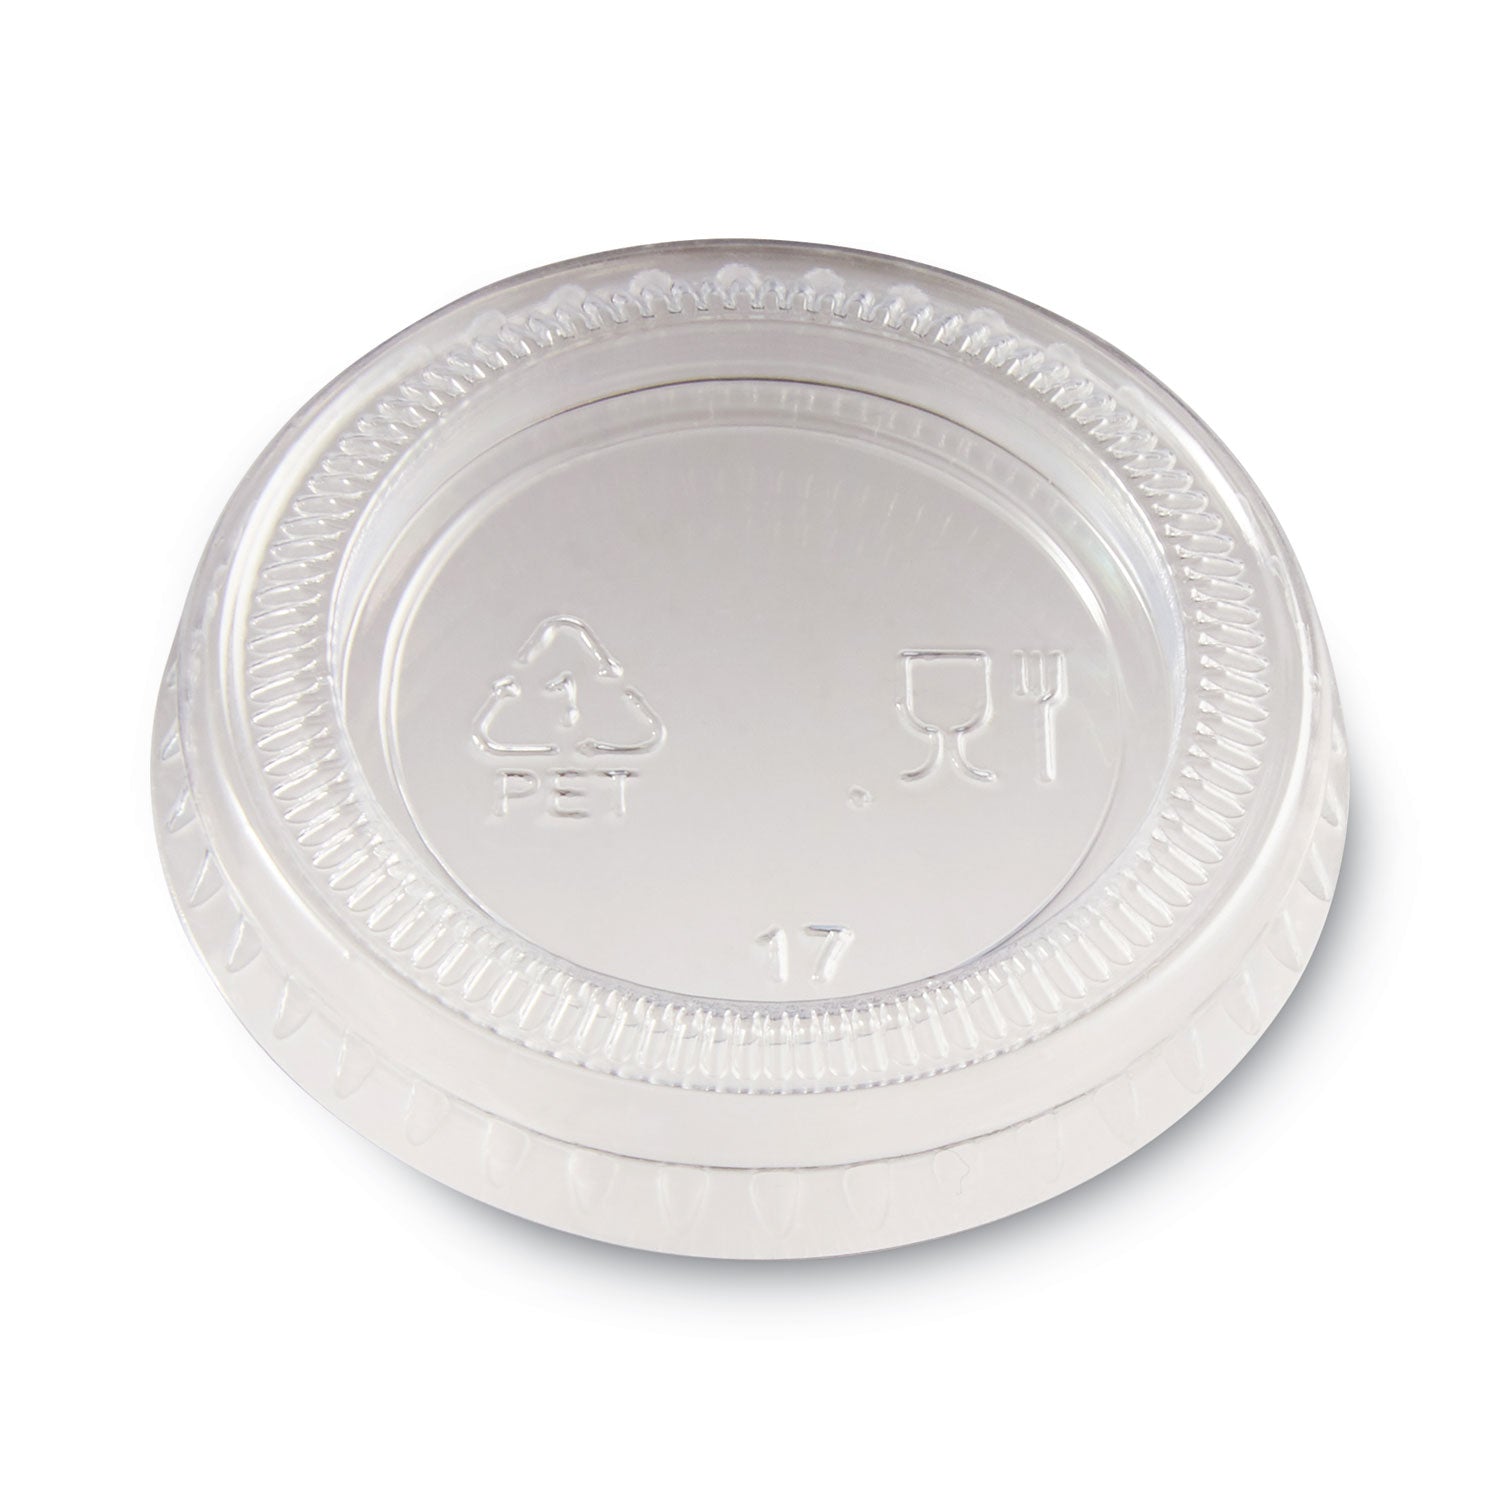 plastic-portion-cup-lid-fits-1-oz-portion-cups-clear-4800-carton_dxepl10clear - 1